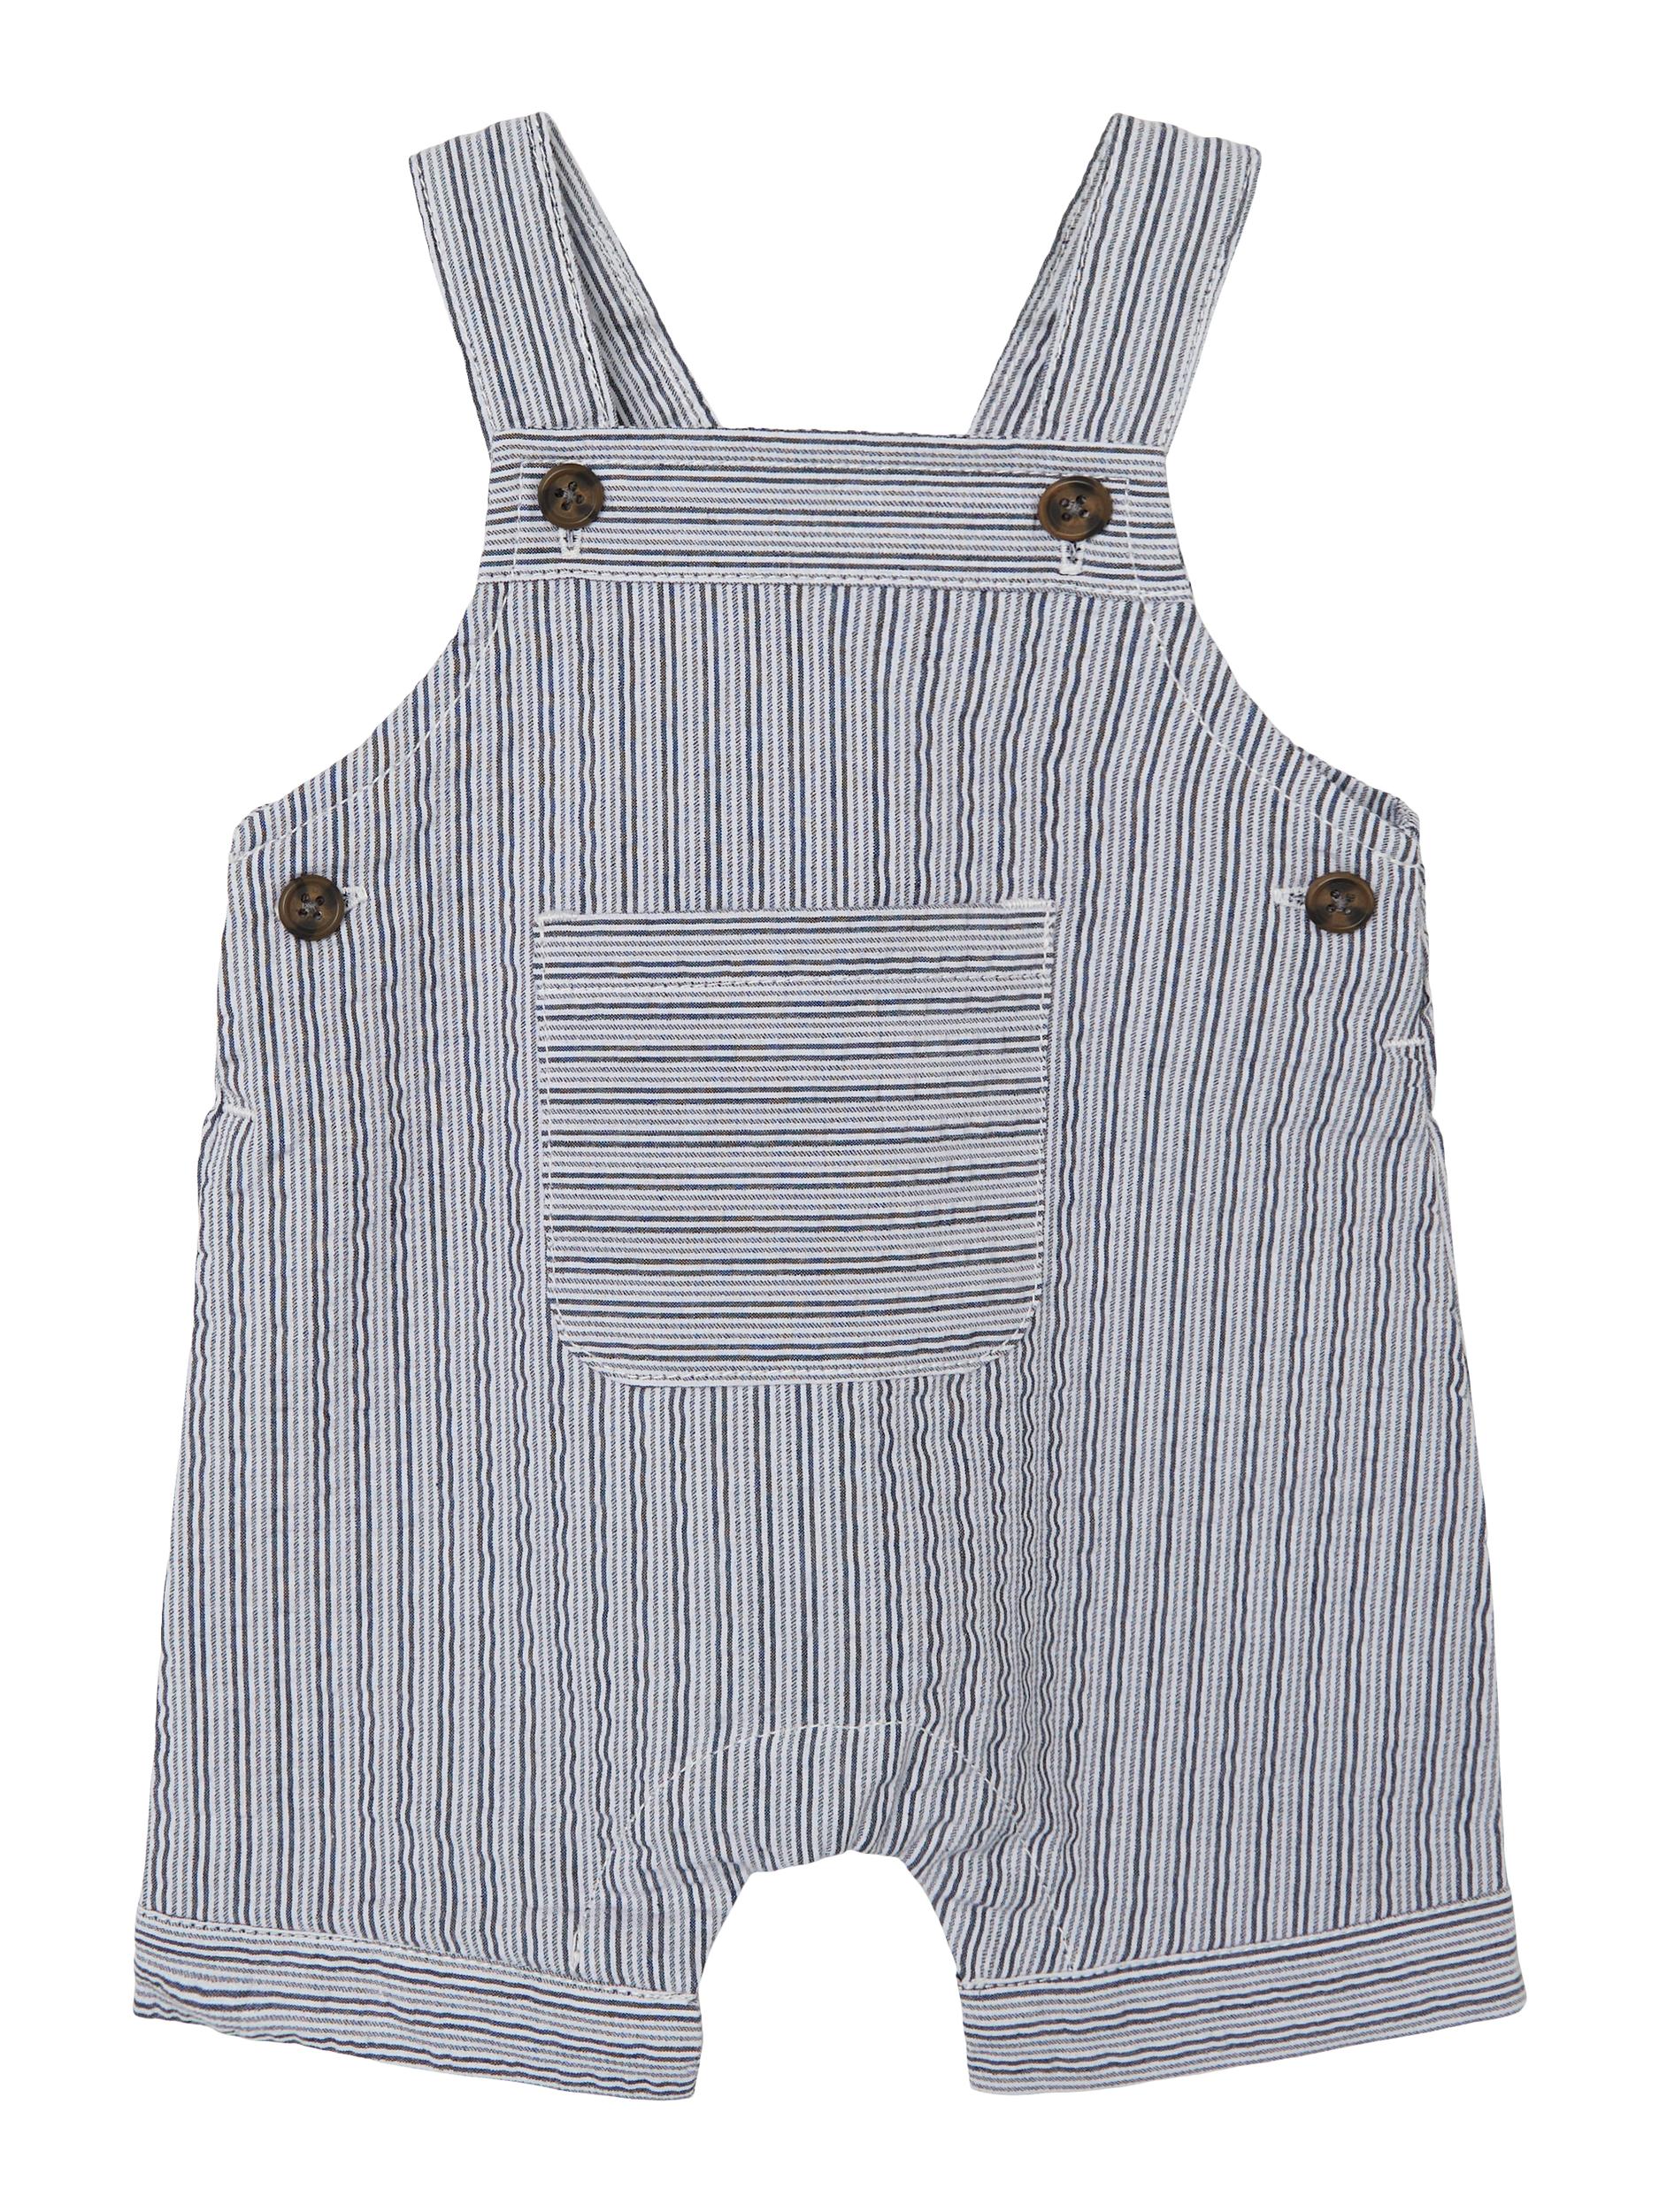 Boy's Ferolle Short Overalls-Front View